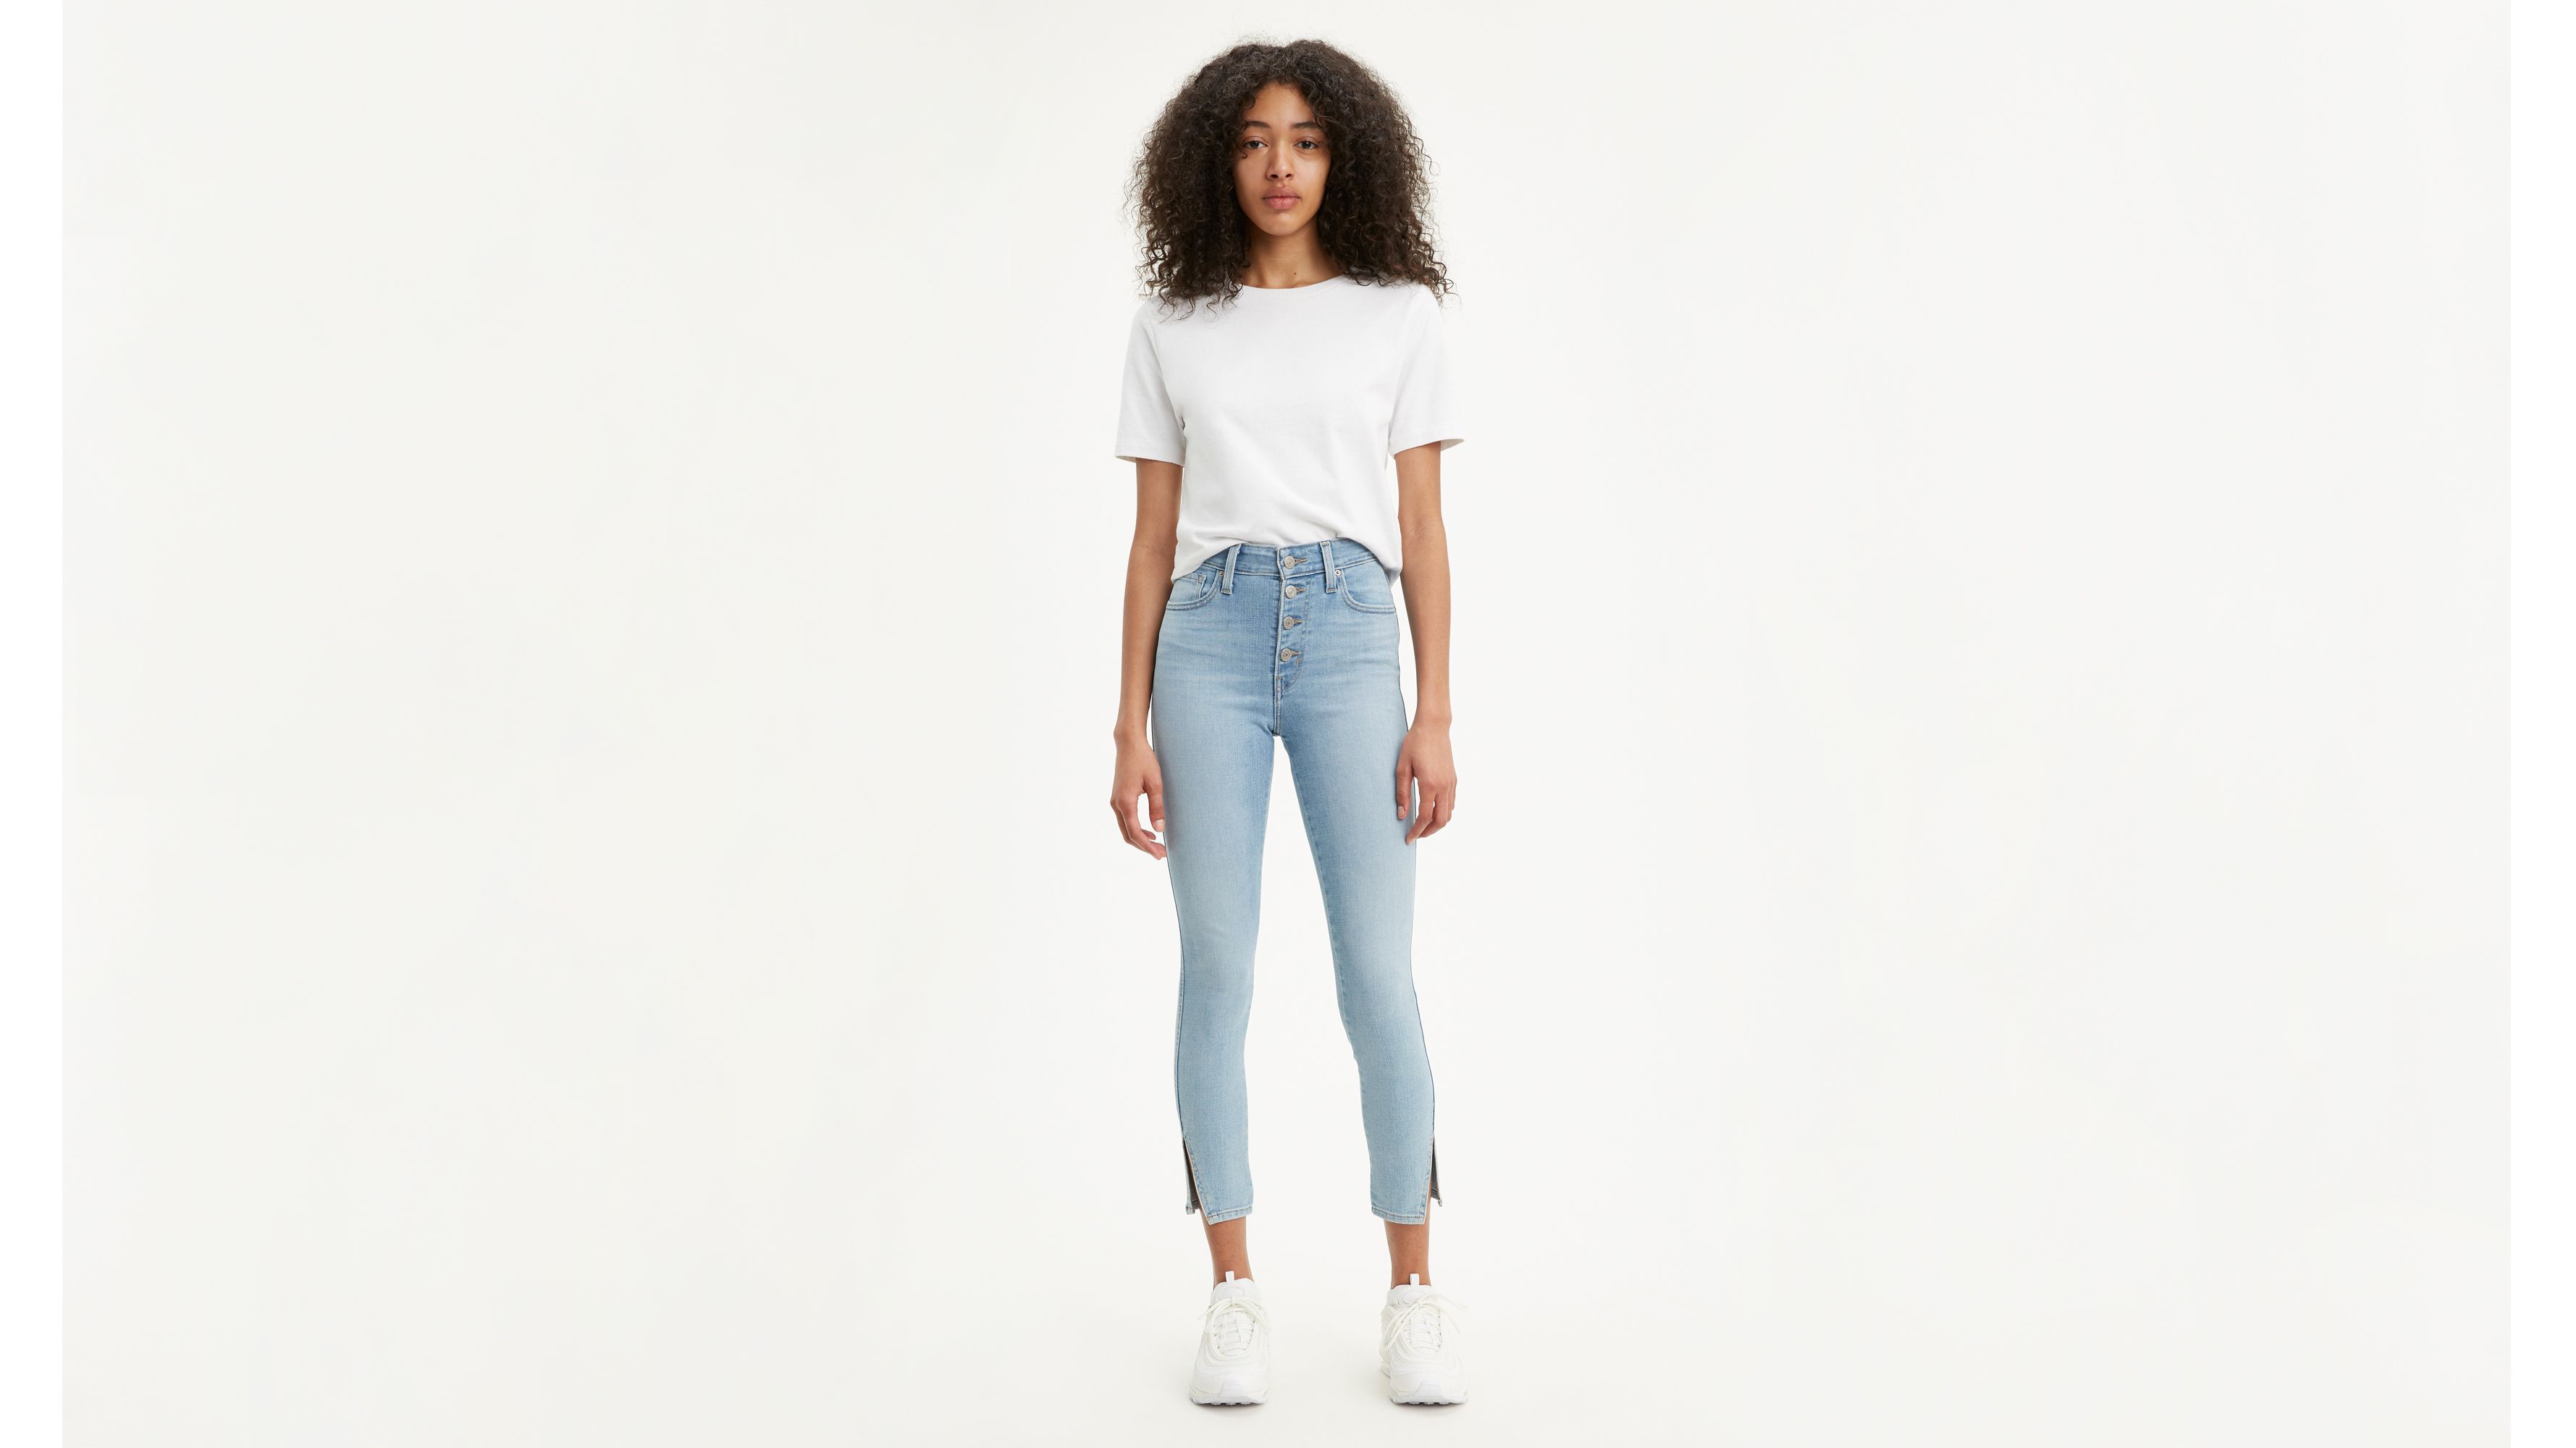 levi's 721 ankle jeans